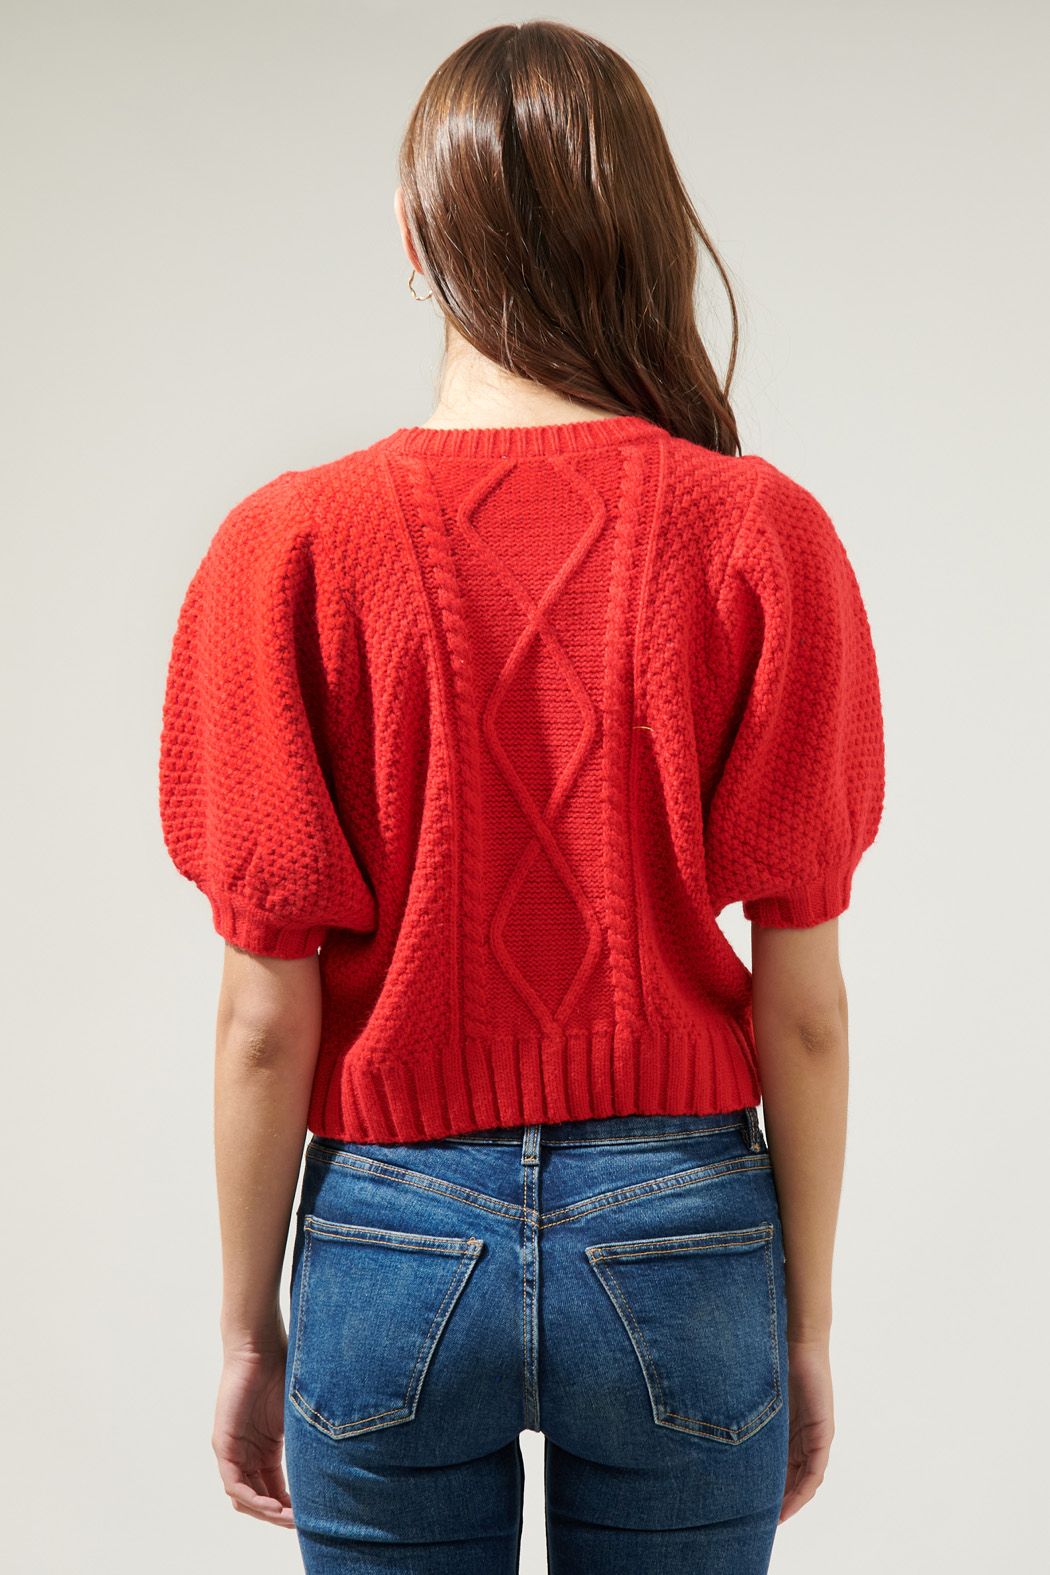 Sugar Lips | Red Cable Knit Top | Sweetest Stitch Online Boutique